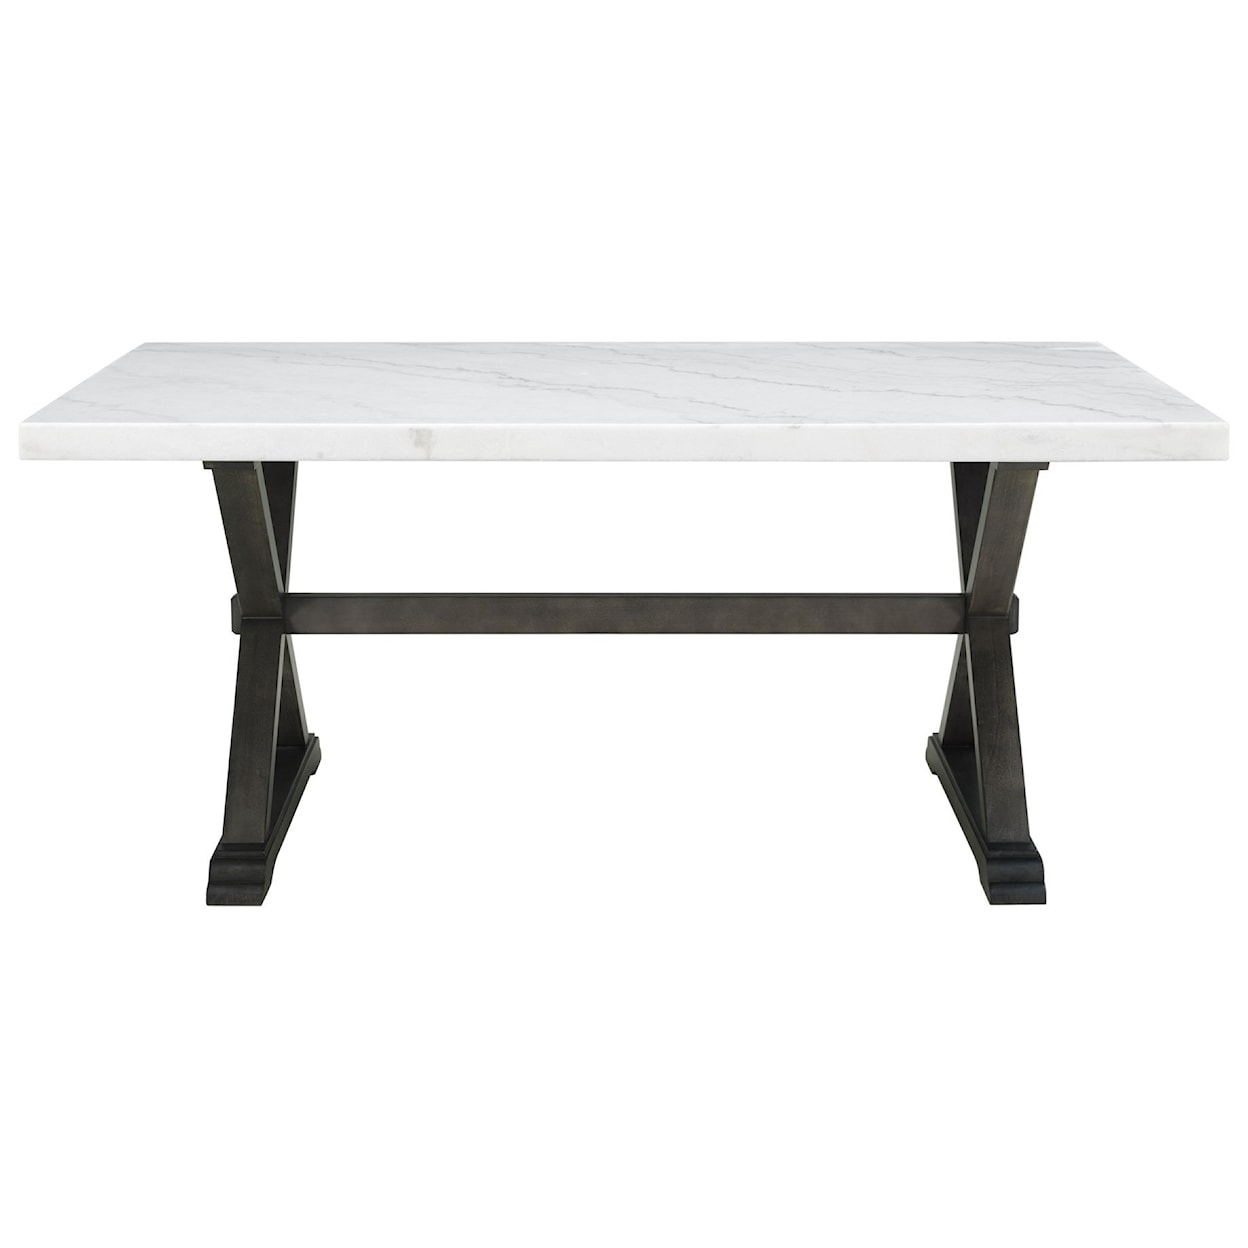 Elements International Lexi Dining Table